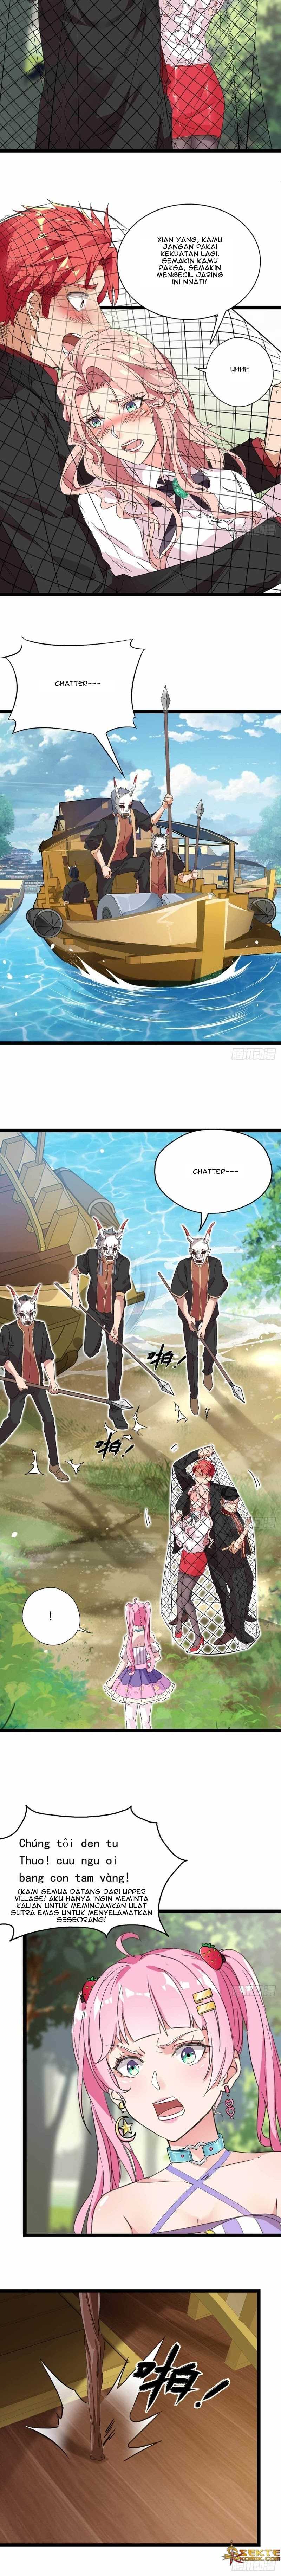 Dianfeng Chapter 76